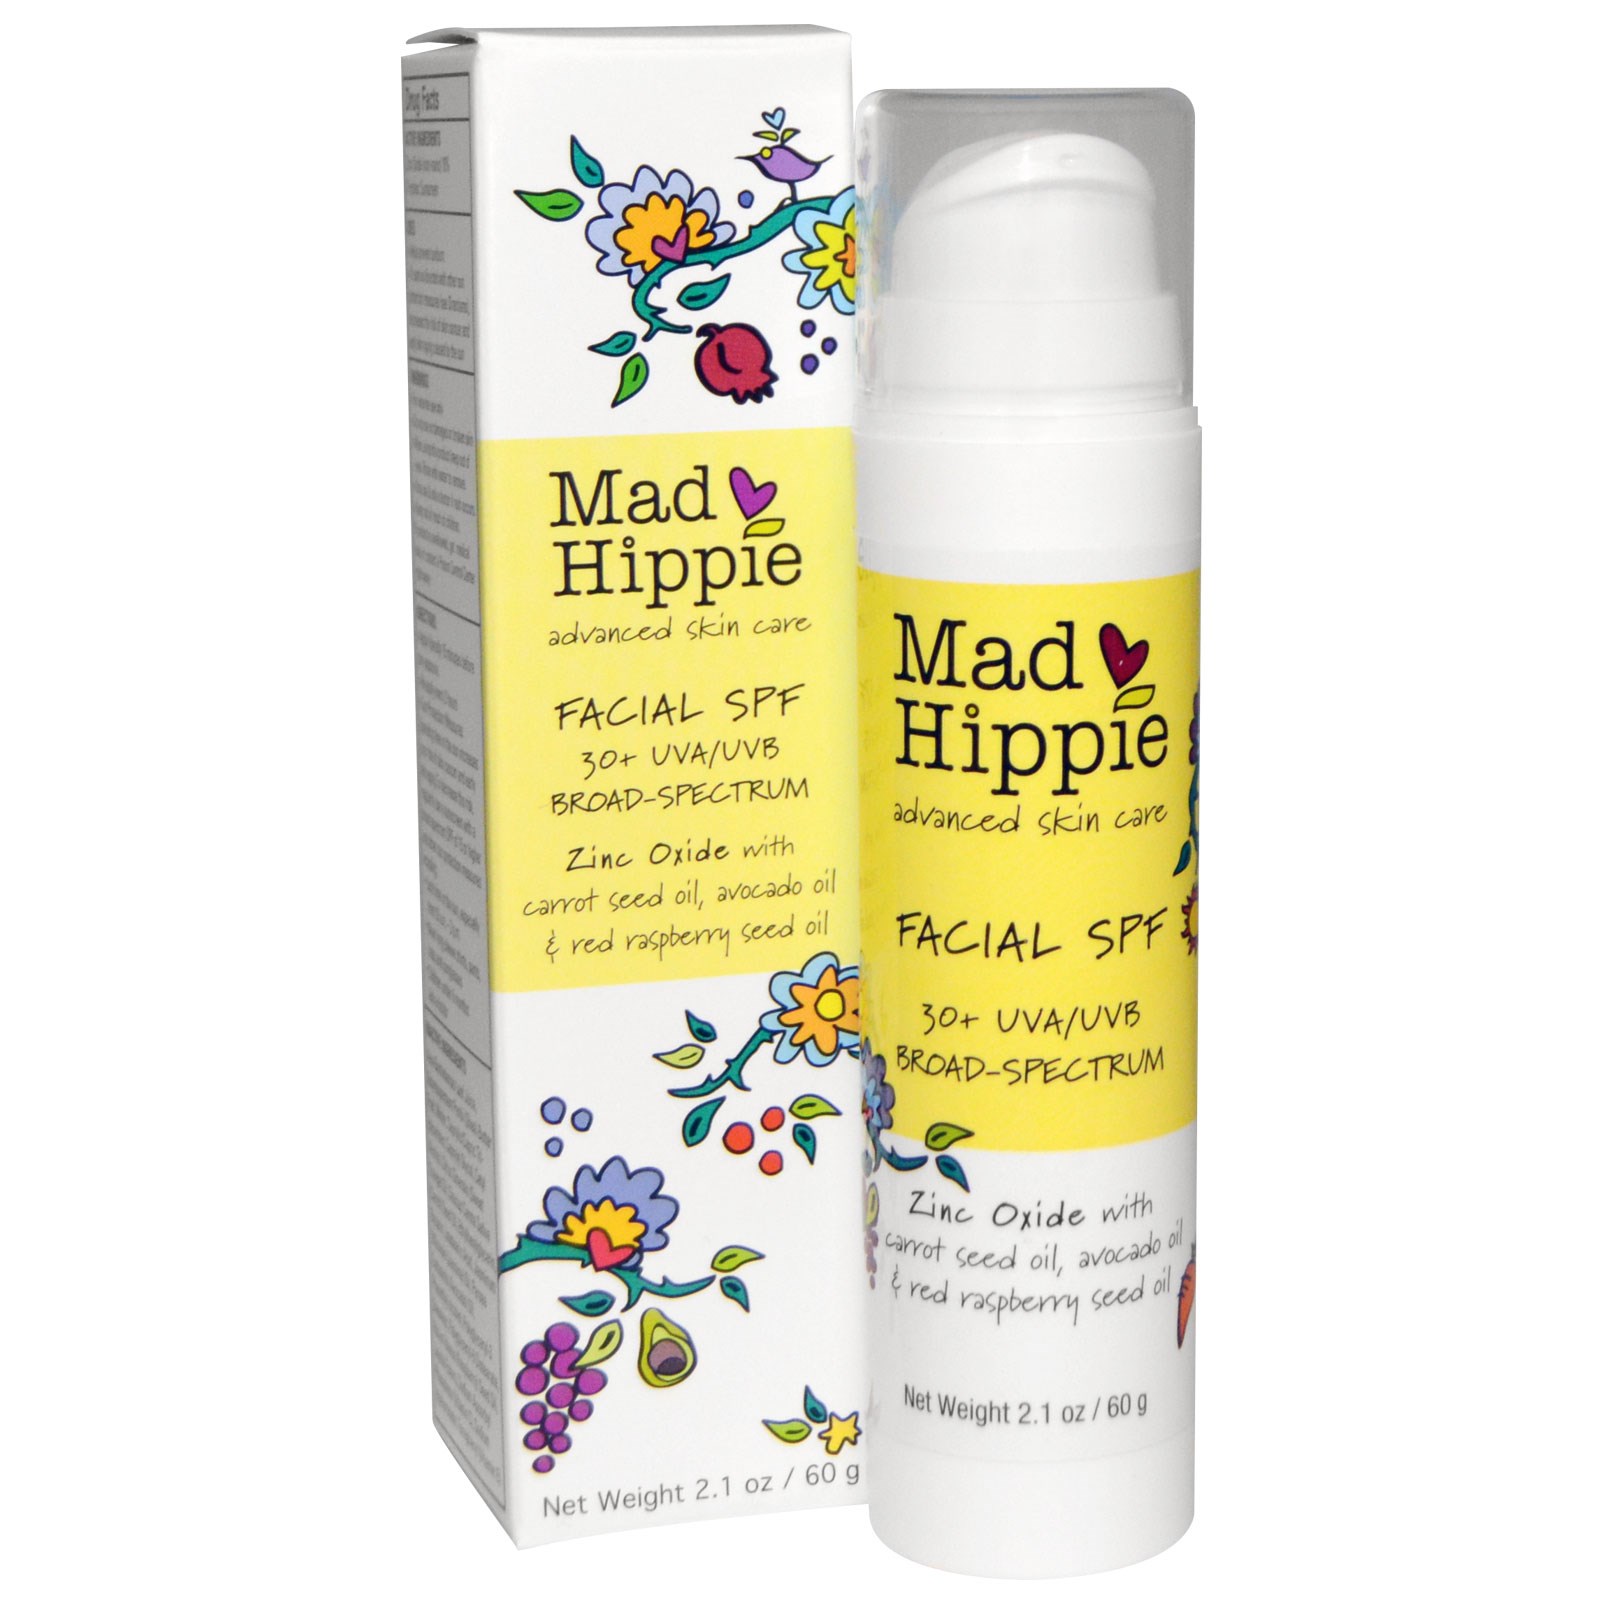 We recommend Mad Hippie facial SPF 30+, UVA/UVB Broad Spectrum protection with Zinc Oxide, carrot seed oil, avocado oil, and red raspberry seed oil.&nbsp;